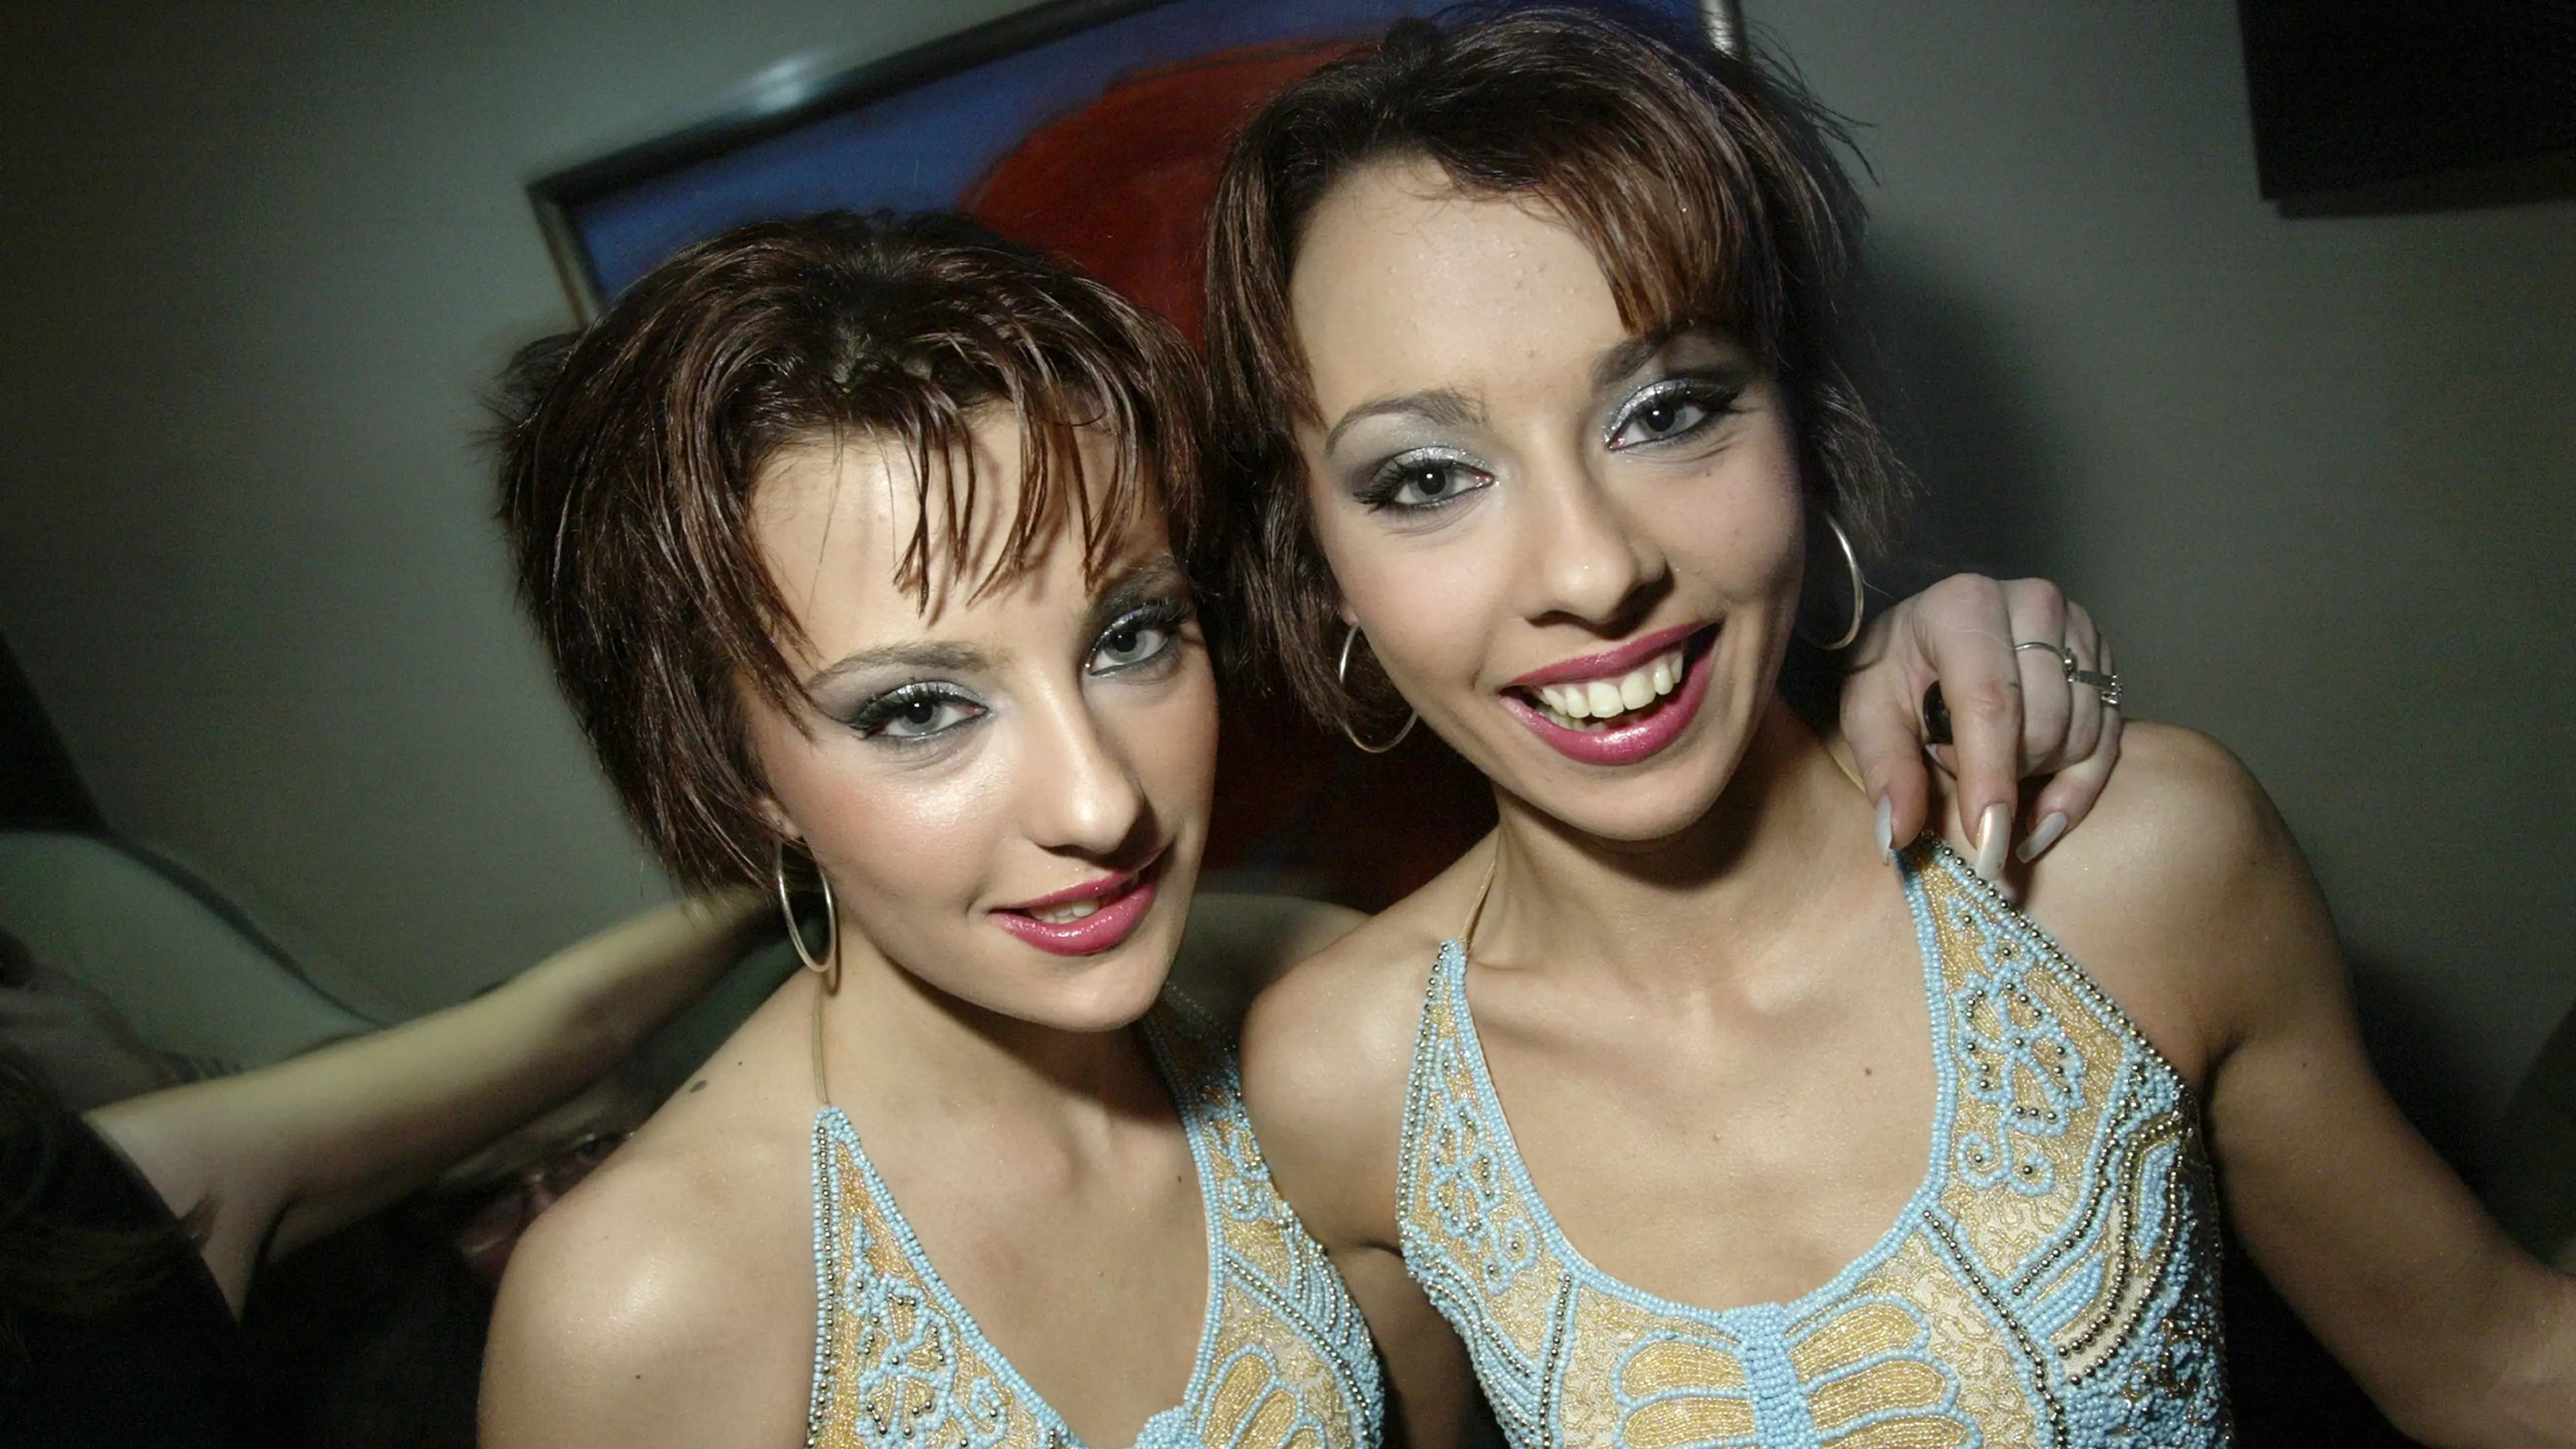 Both Of The Cheeky Girls Are Now Working At Hyundai Car Dealerships